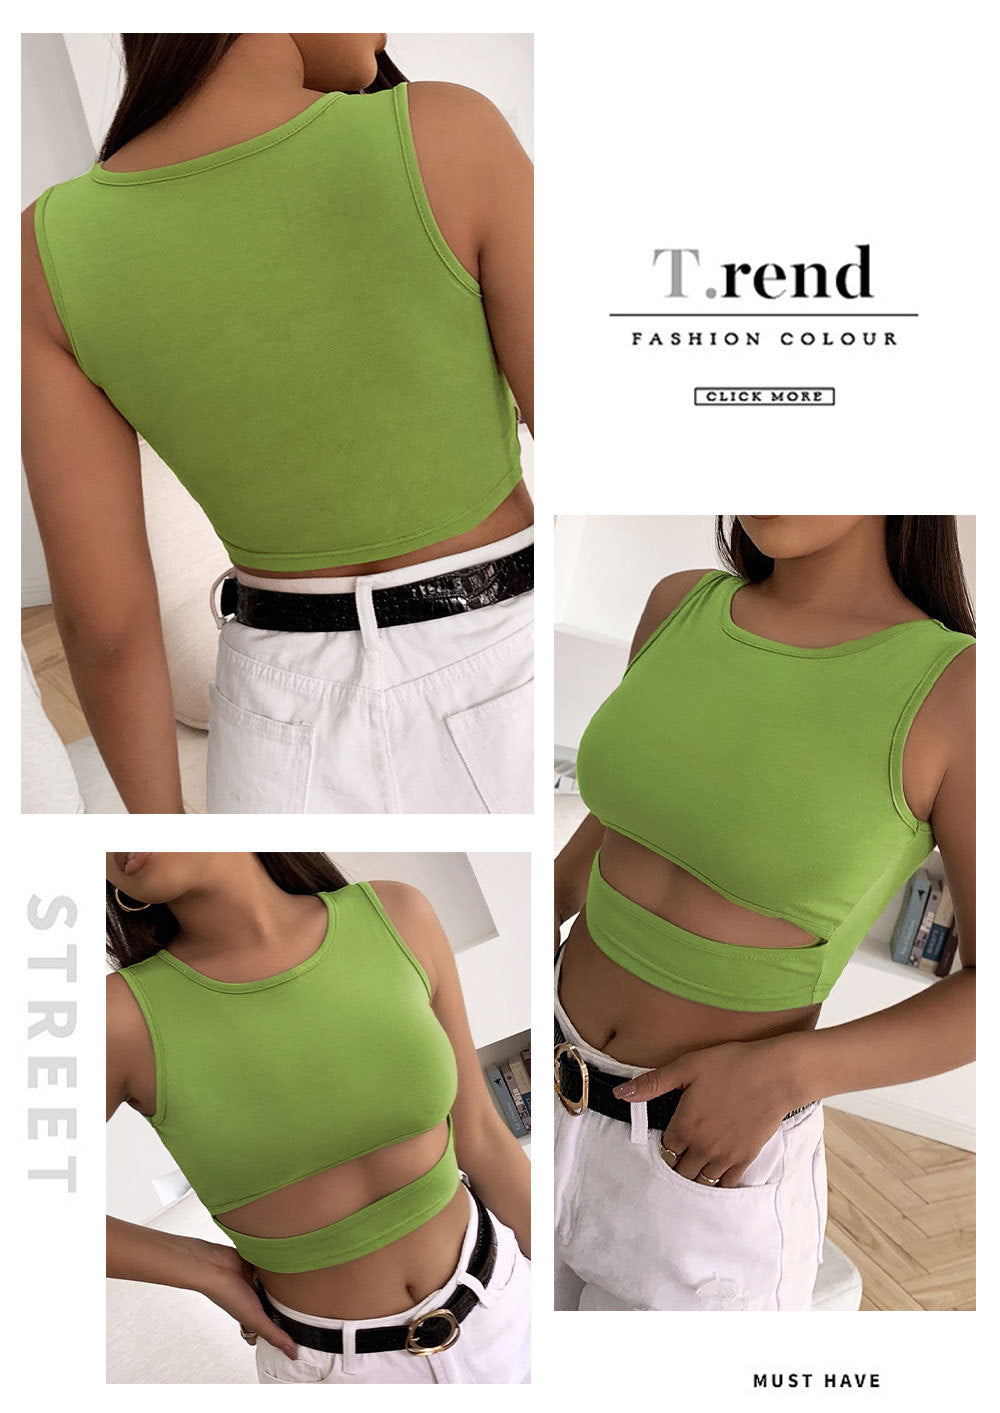 Green Bottom Slouchy Threaded Vest Sexy Top for women